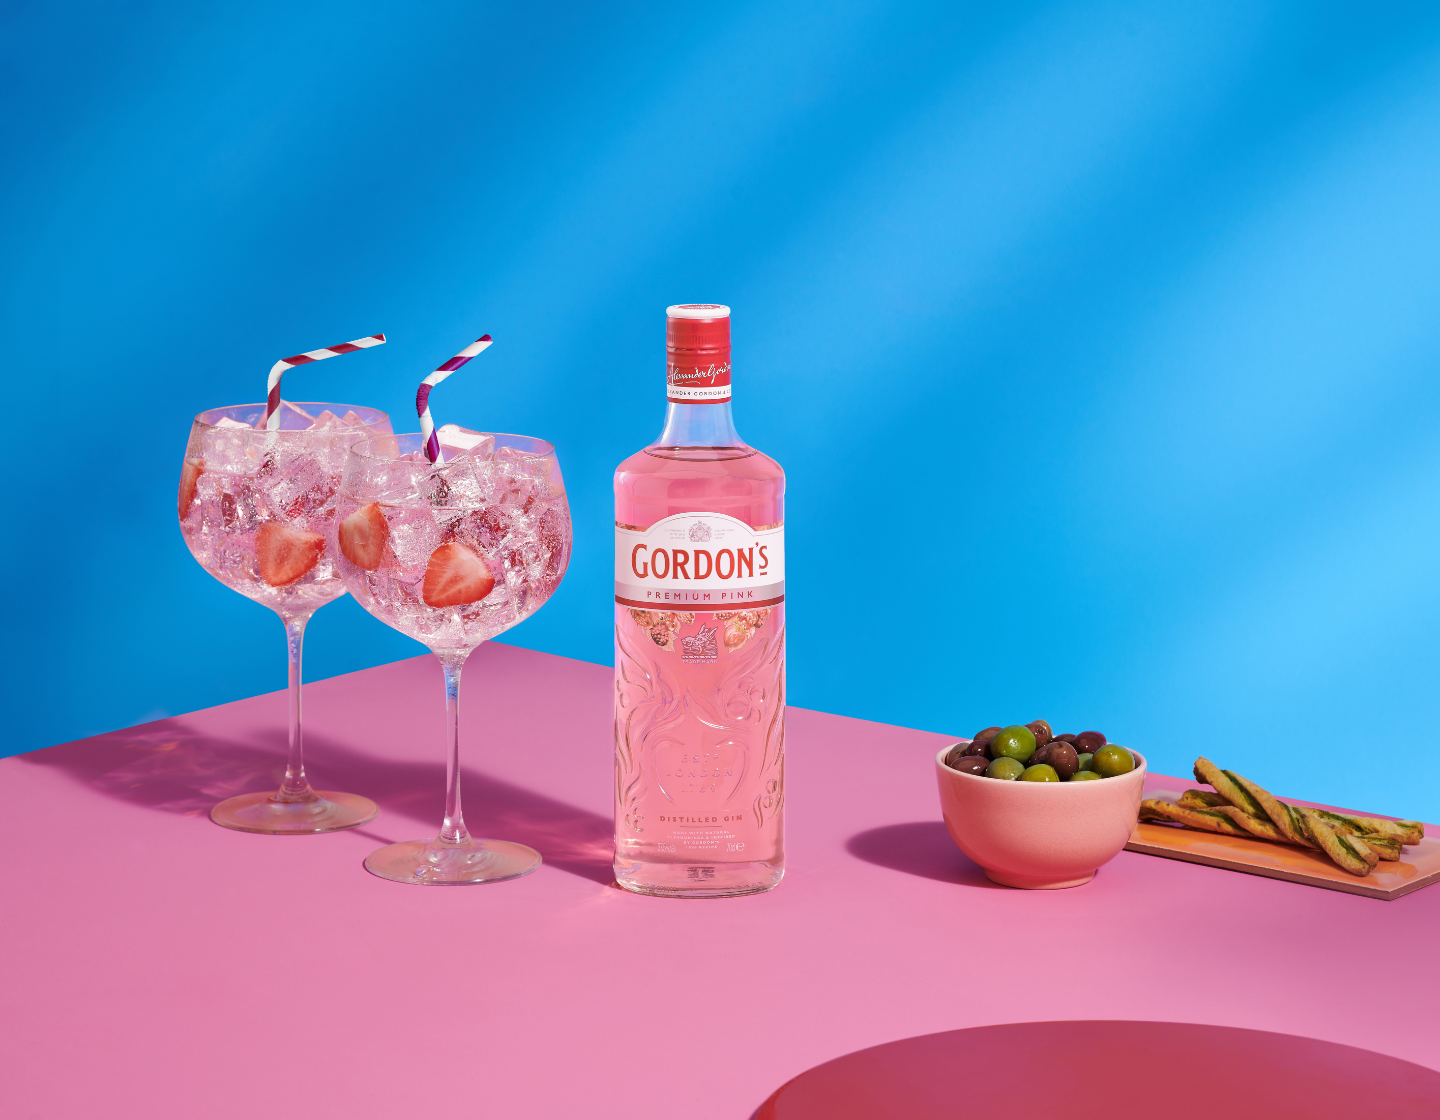 Bottle of Gordon’s Premium Pink gin beside two G&T glasses against pink and blue background